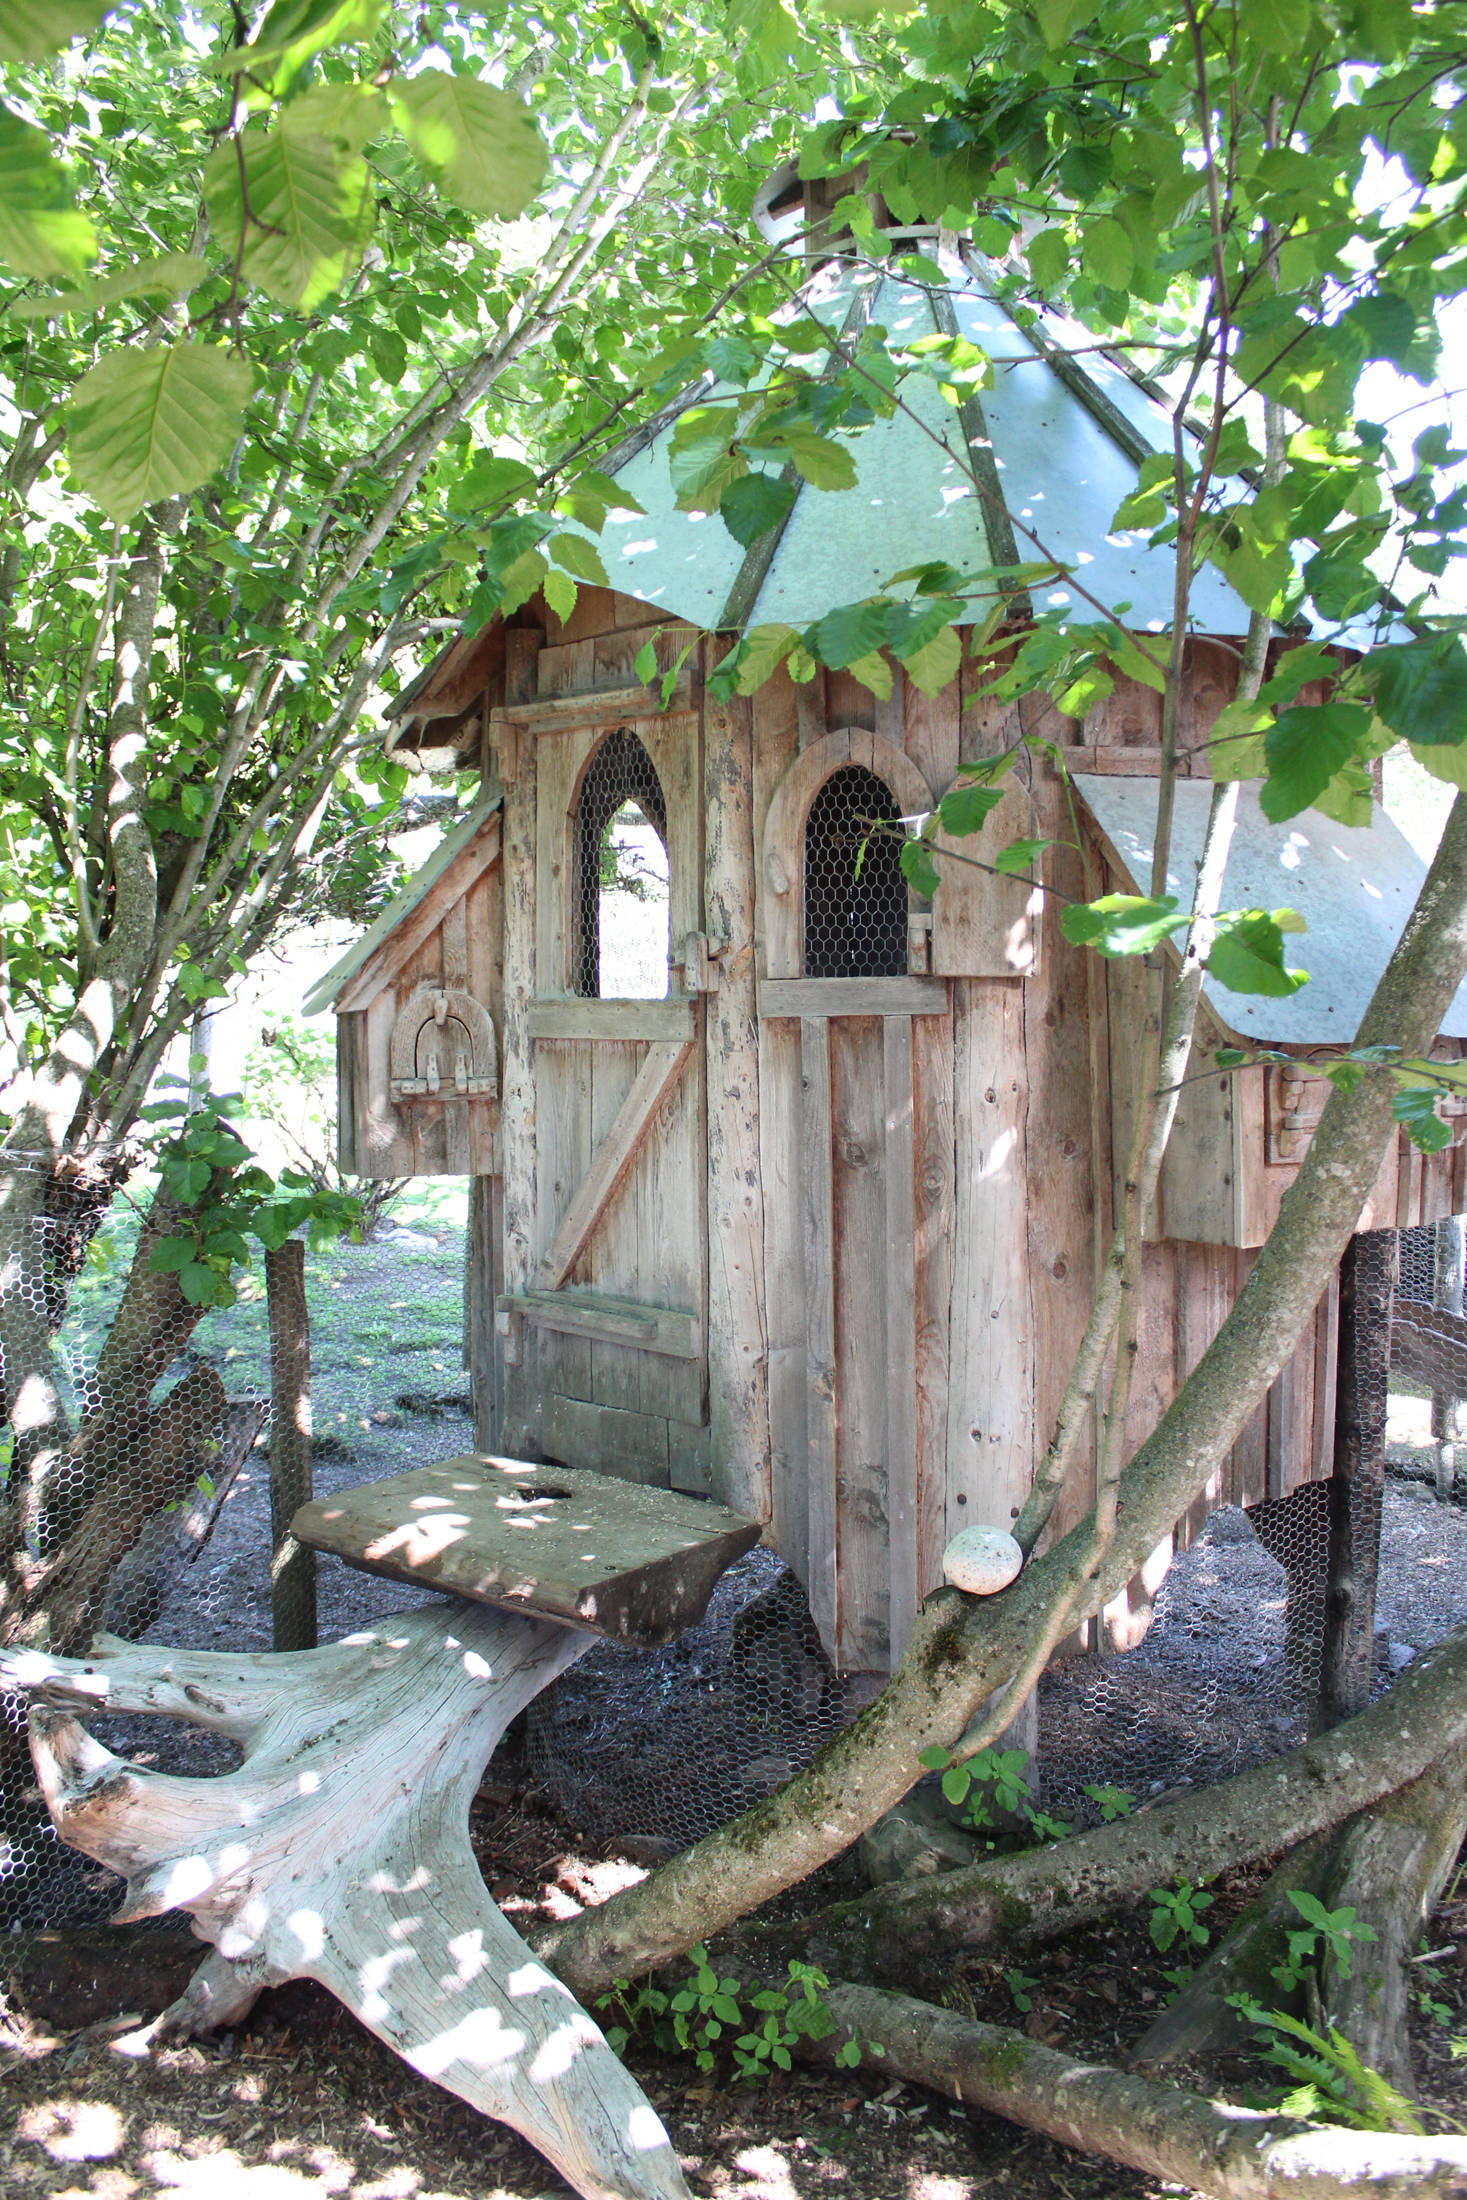 A hand-built chicken coop rests in the shade at the Jeff and Ranja Dean’s farm on Friday, July 6, 2018 off East End Road near Homer, Alaska. Ranja built the coop specifically to accommodate weather in Alaska, including raising it off the ground to prevent snow build up. (Photo by Megan Pacer/Homer News)